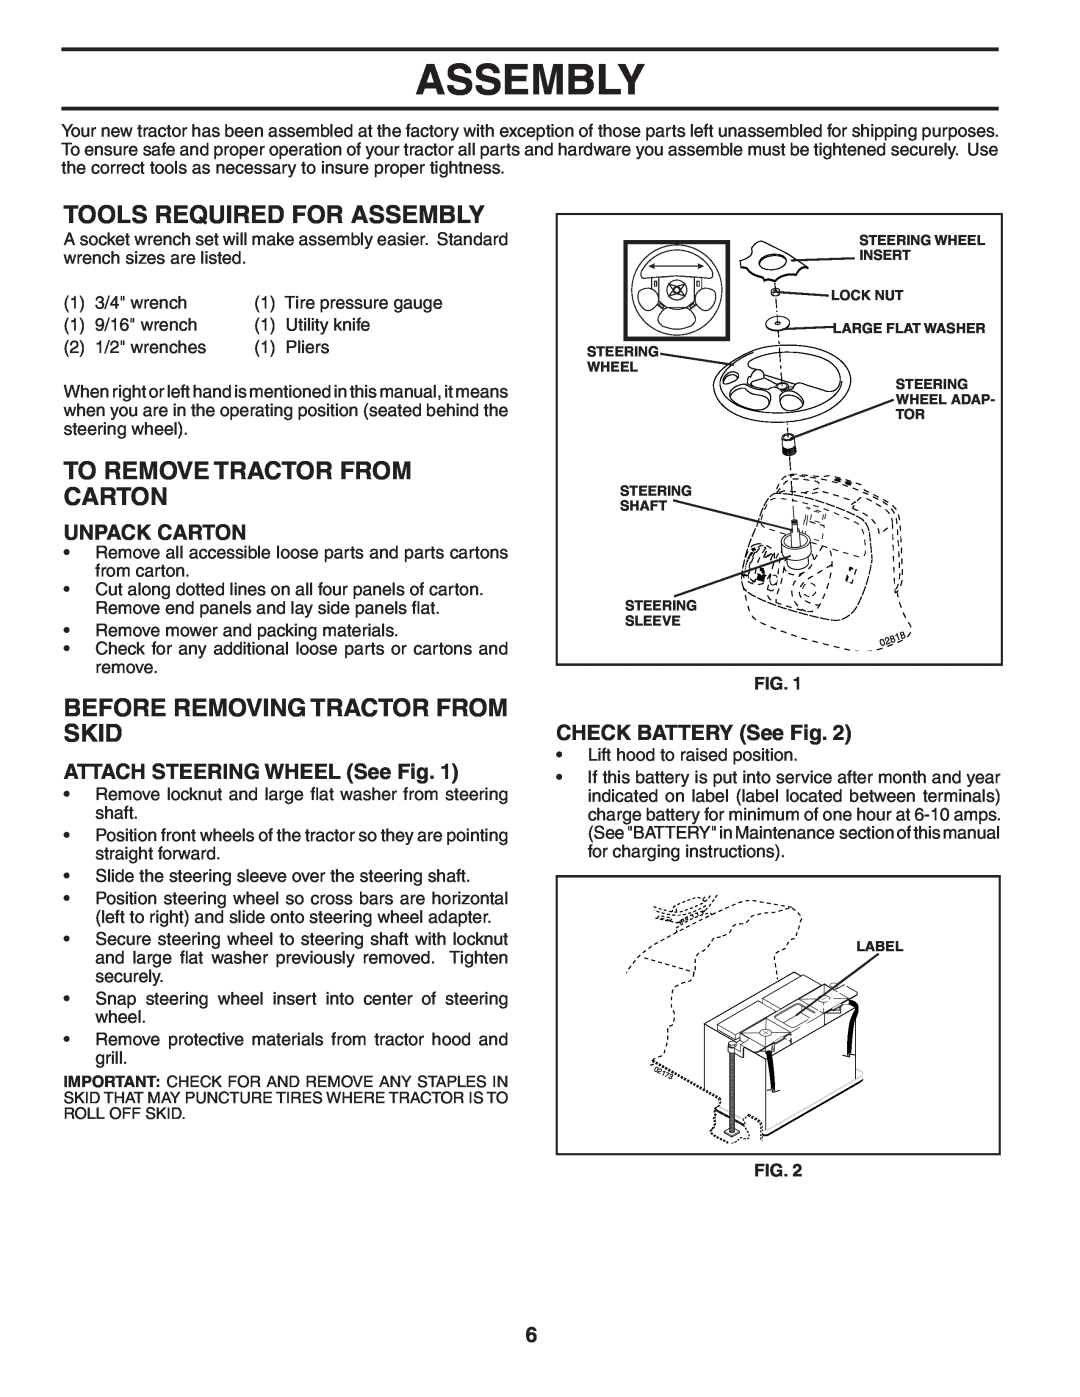 Poulan PKGTH2554 manual Tools Required For Assembly, To Remove Tractor From Carton, Before Removing Tractor From Skid 